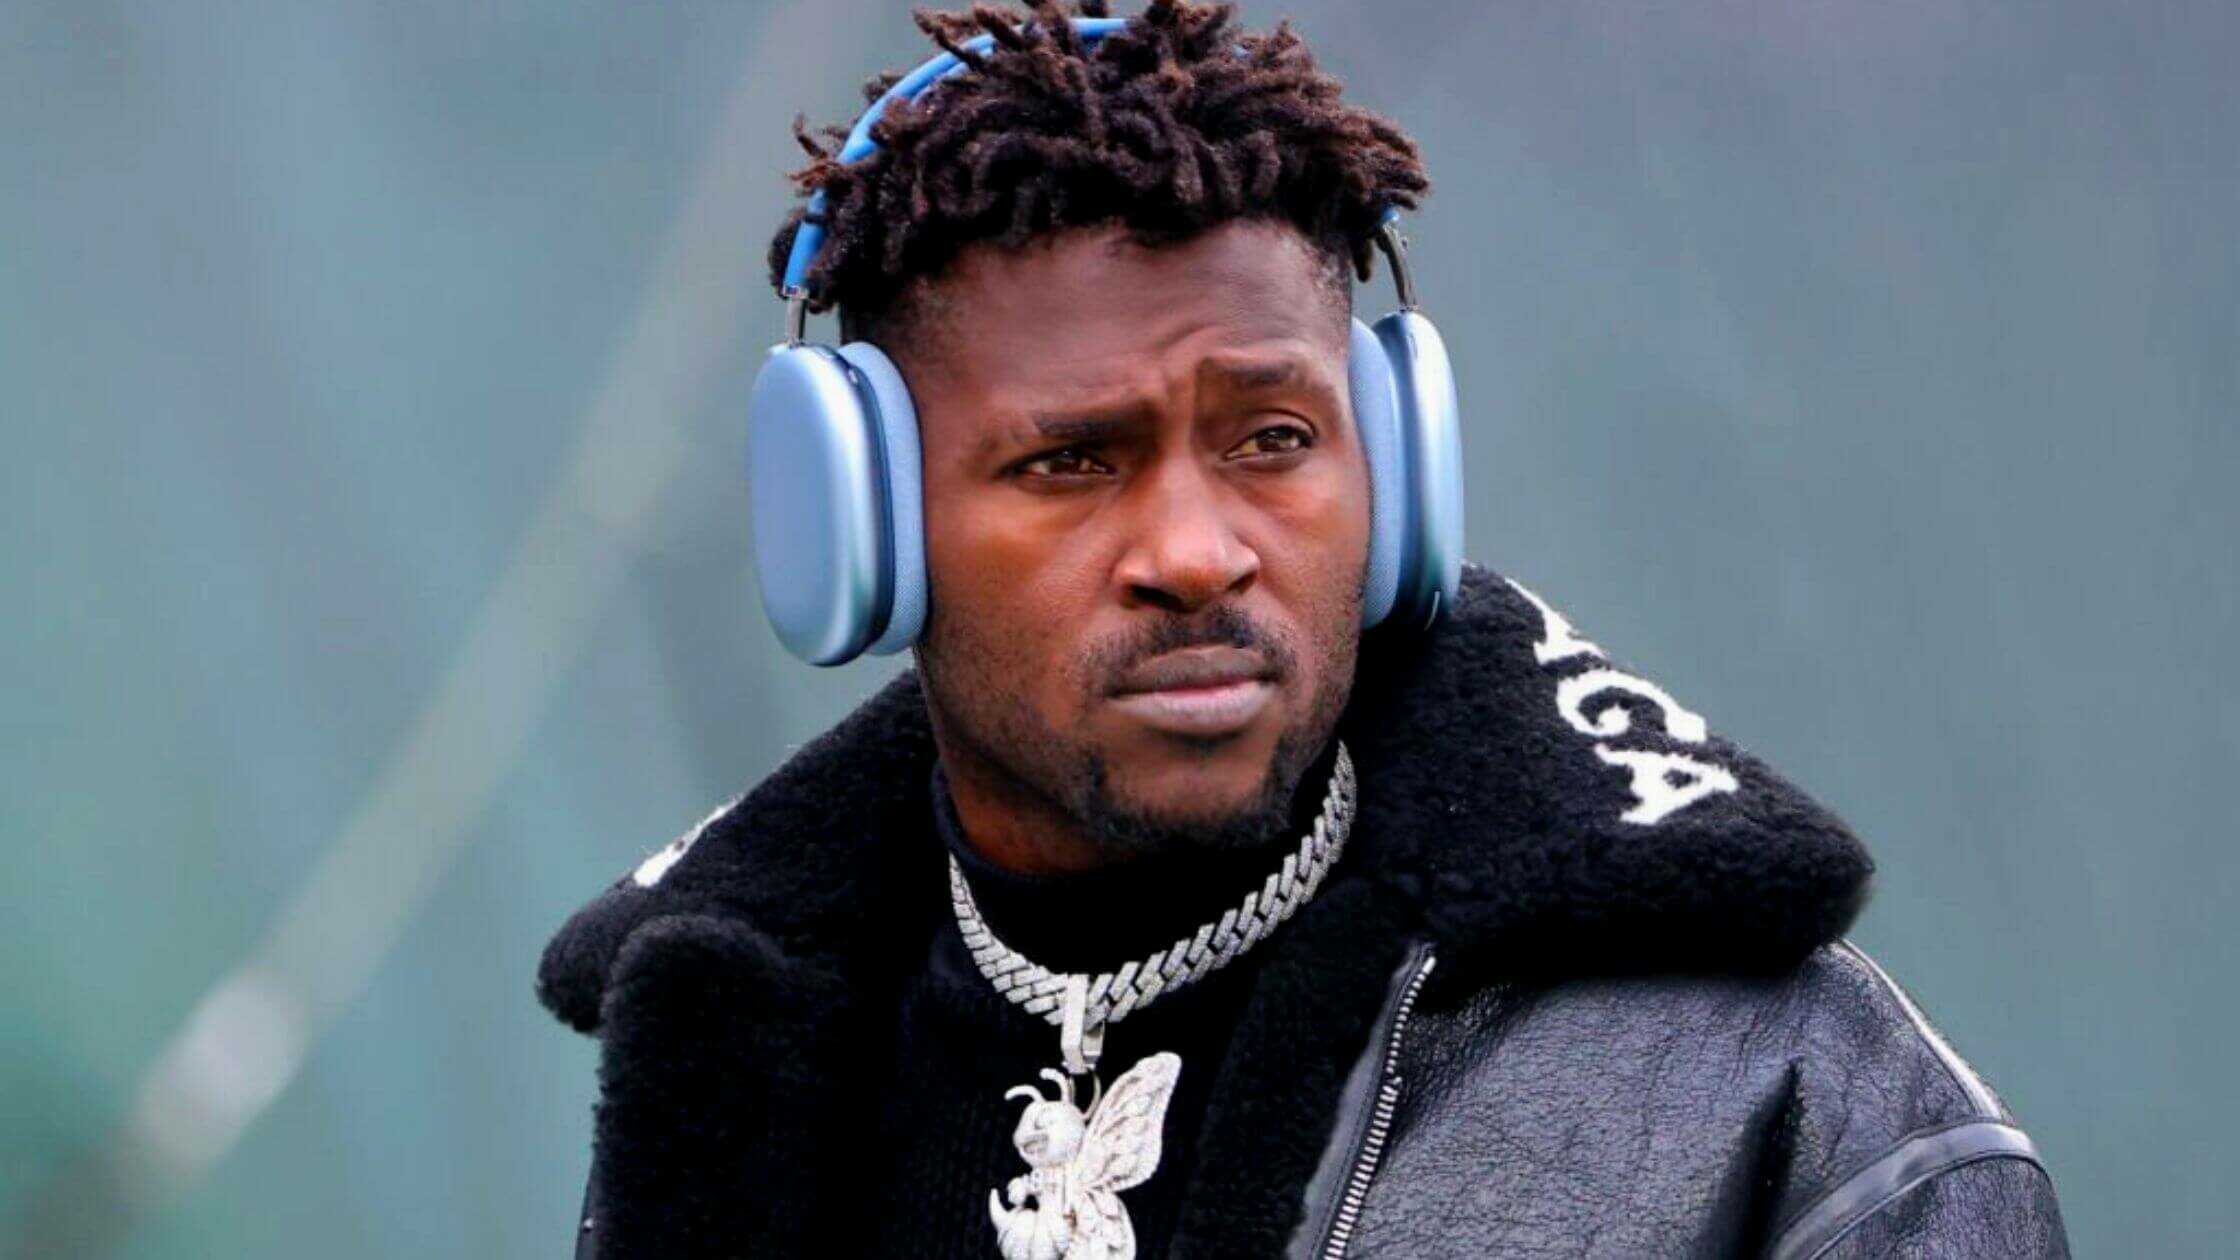 Tampa Police Issue Arrest Warrant For Antonio Brown For Domestic Assault